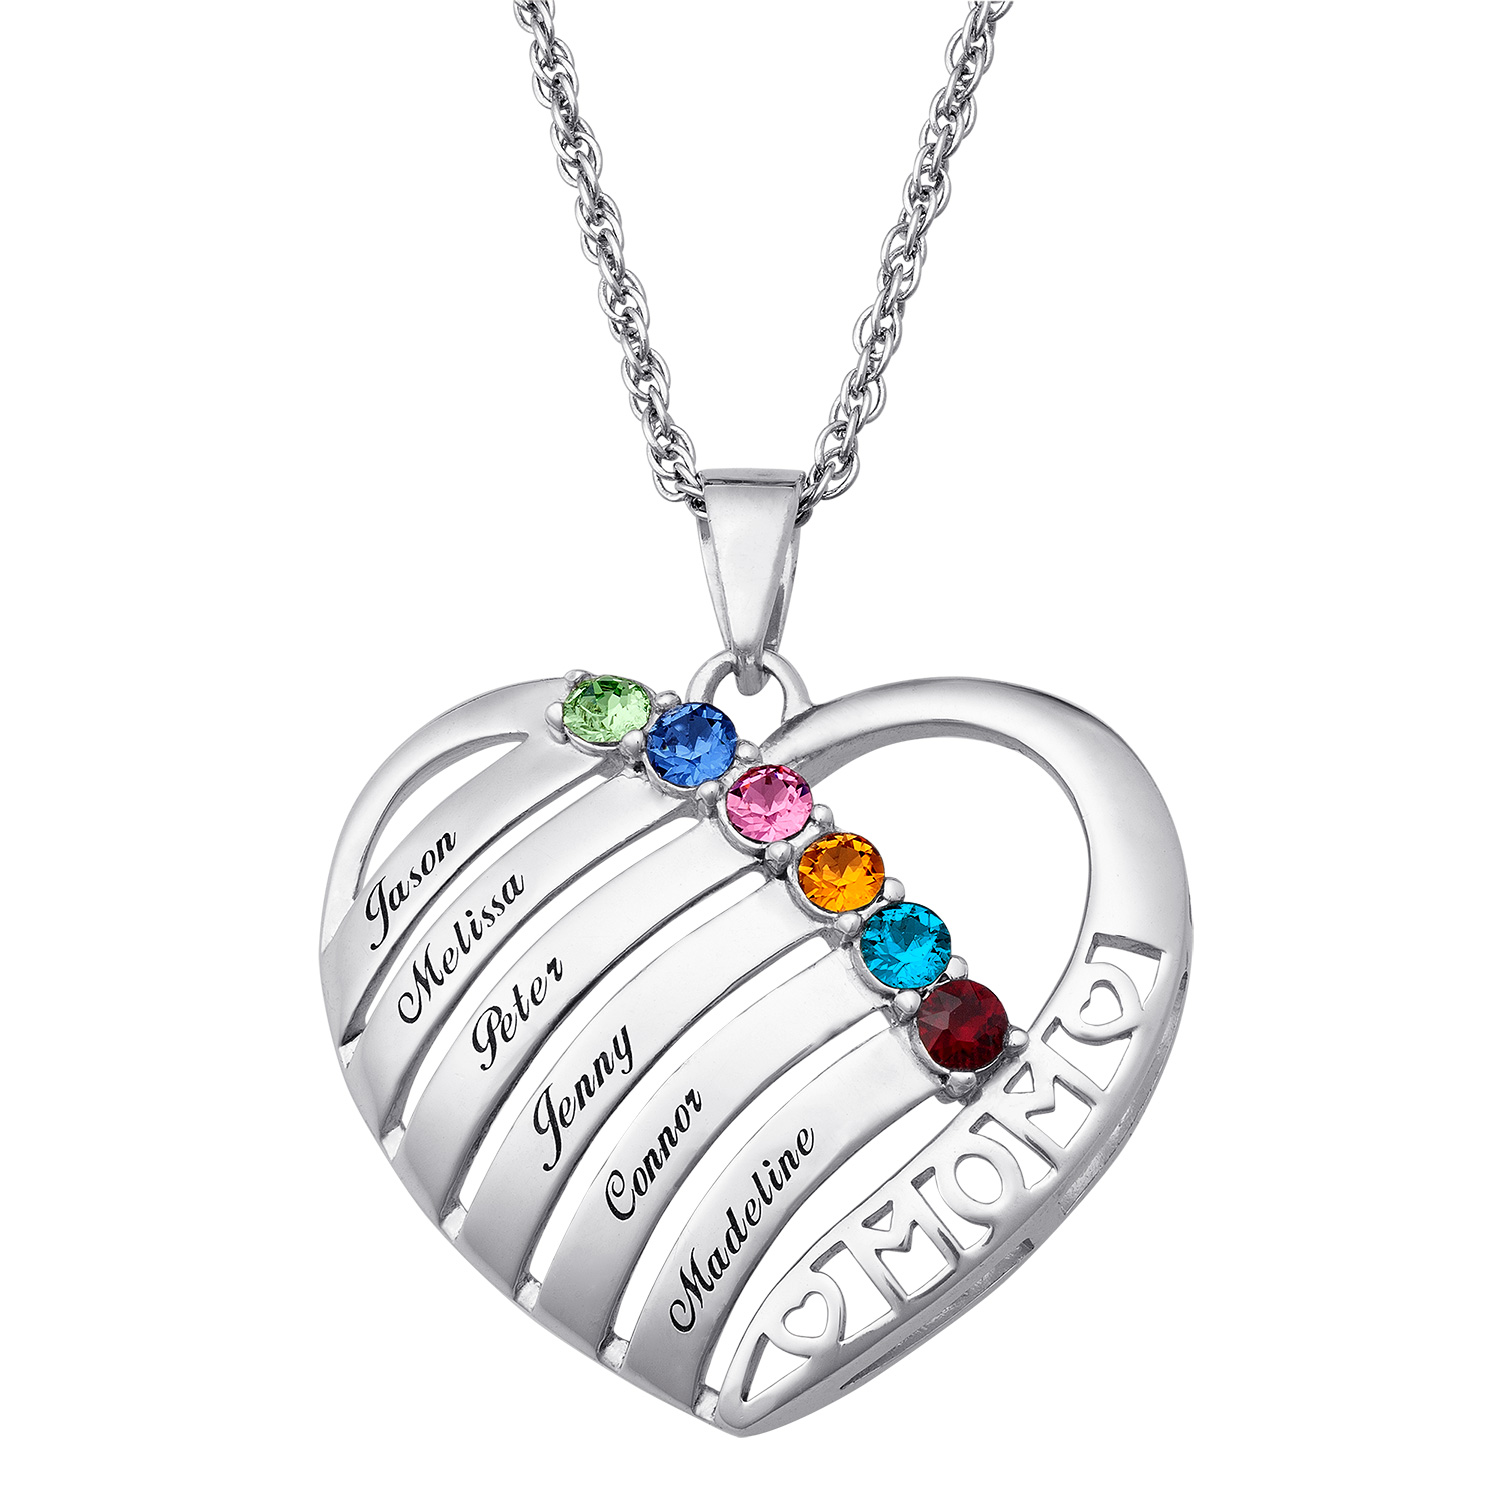 Engraved heart birthstone mom necklace